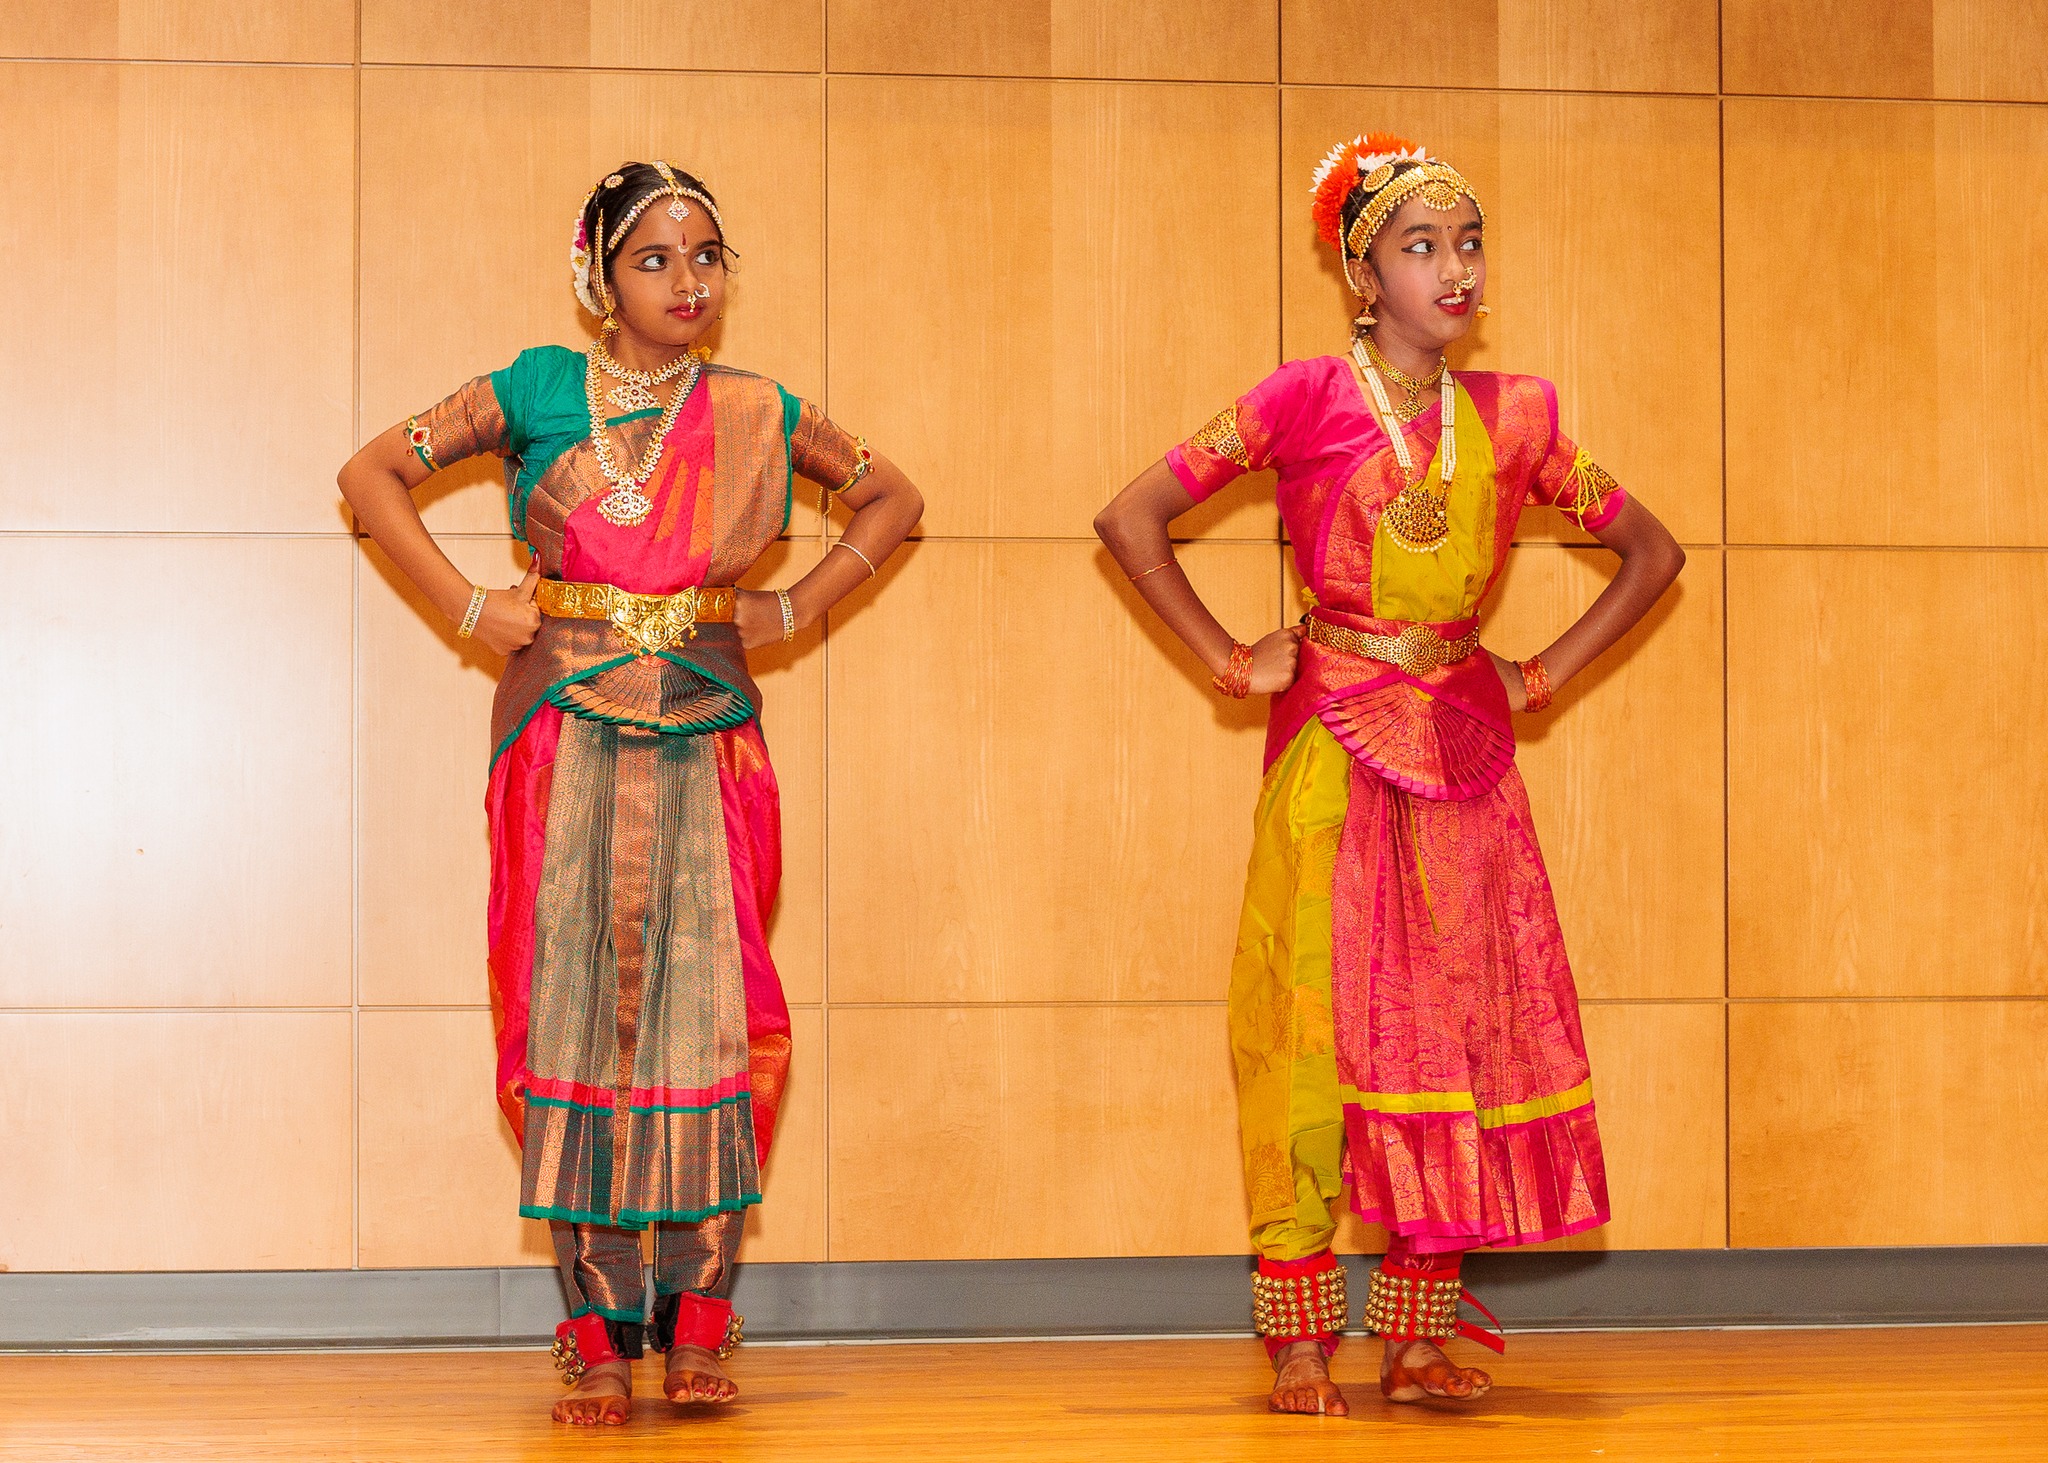 Tana Cultural Competitions started grandly in America (4)